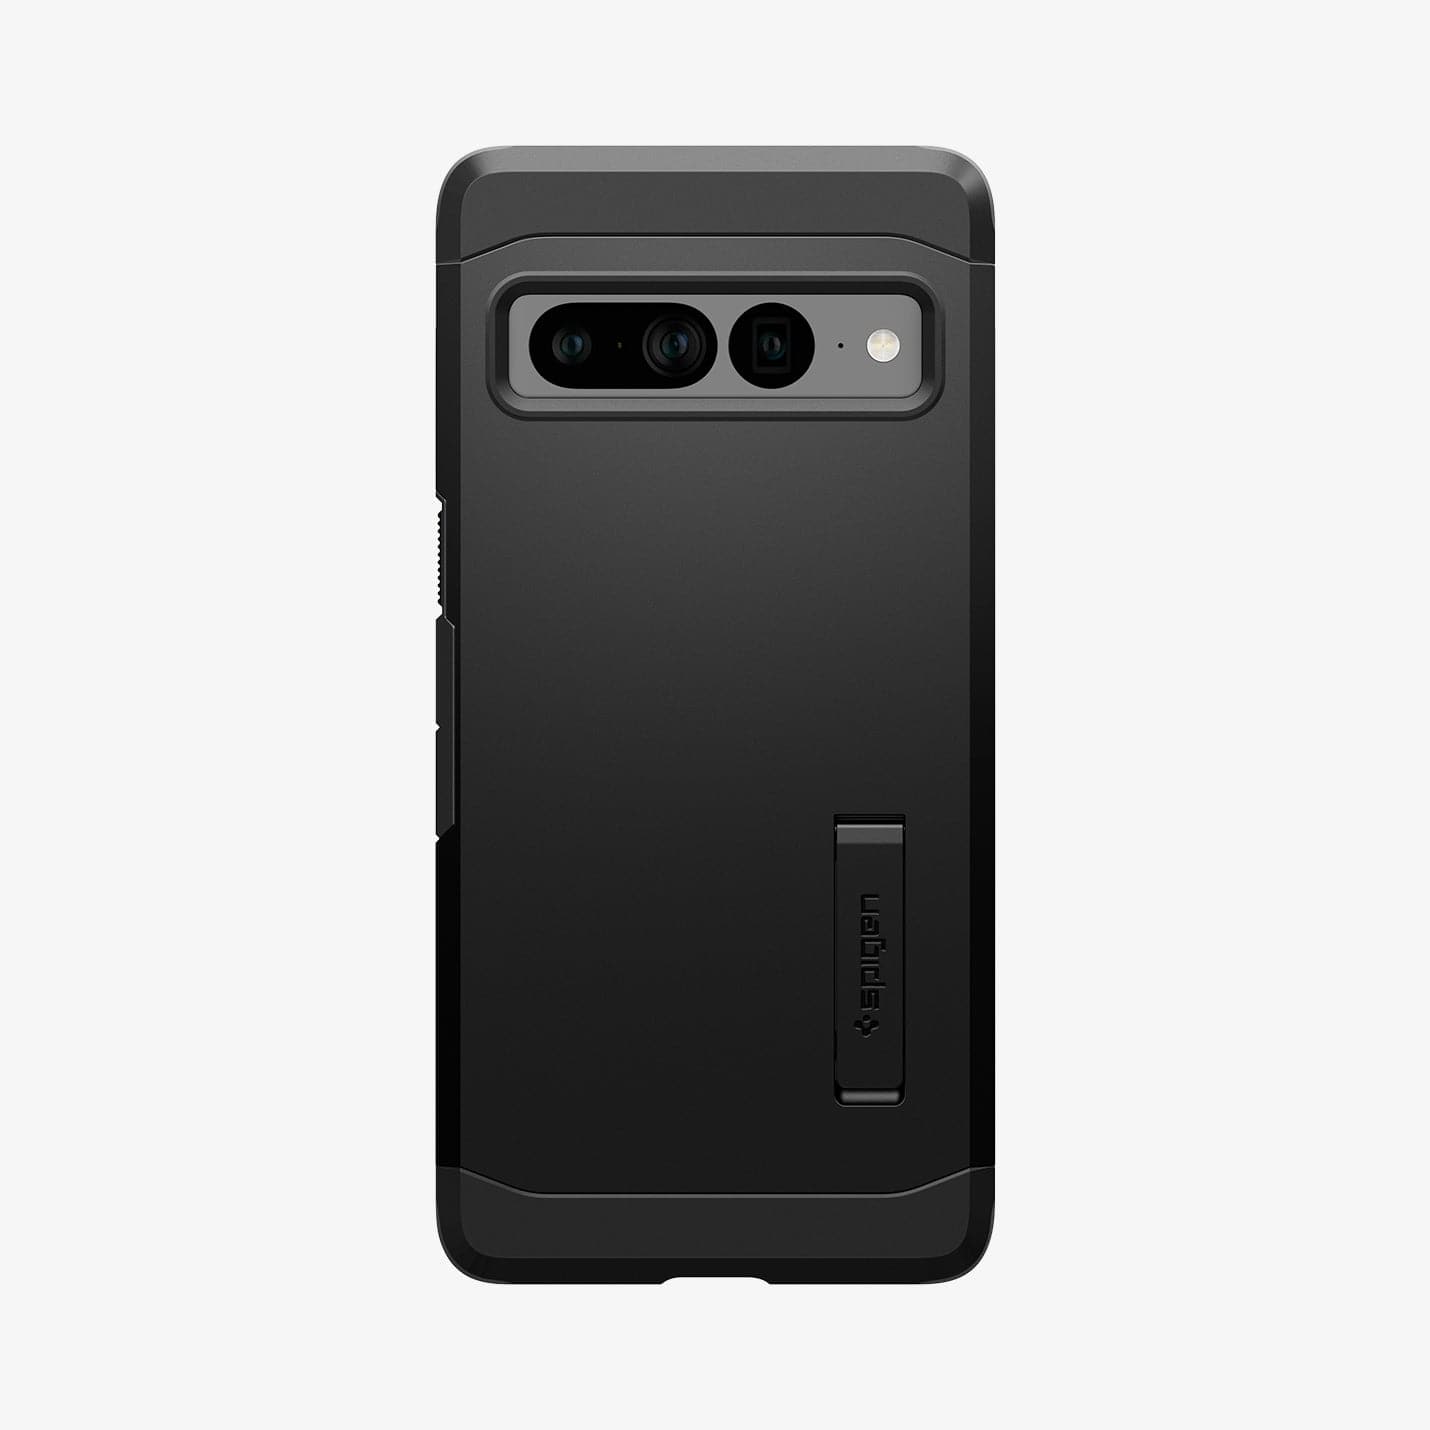 Spigen Pixel 7 cases now live at up to 60% off from $15